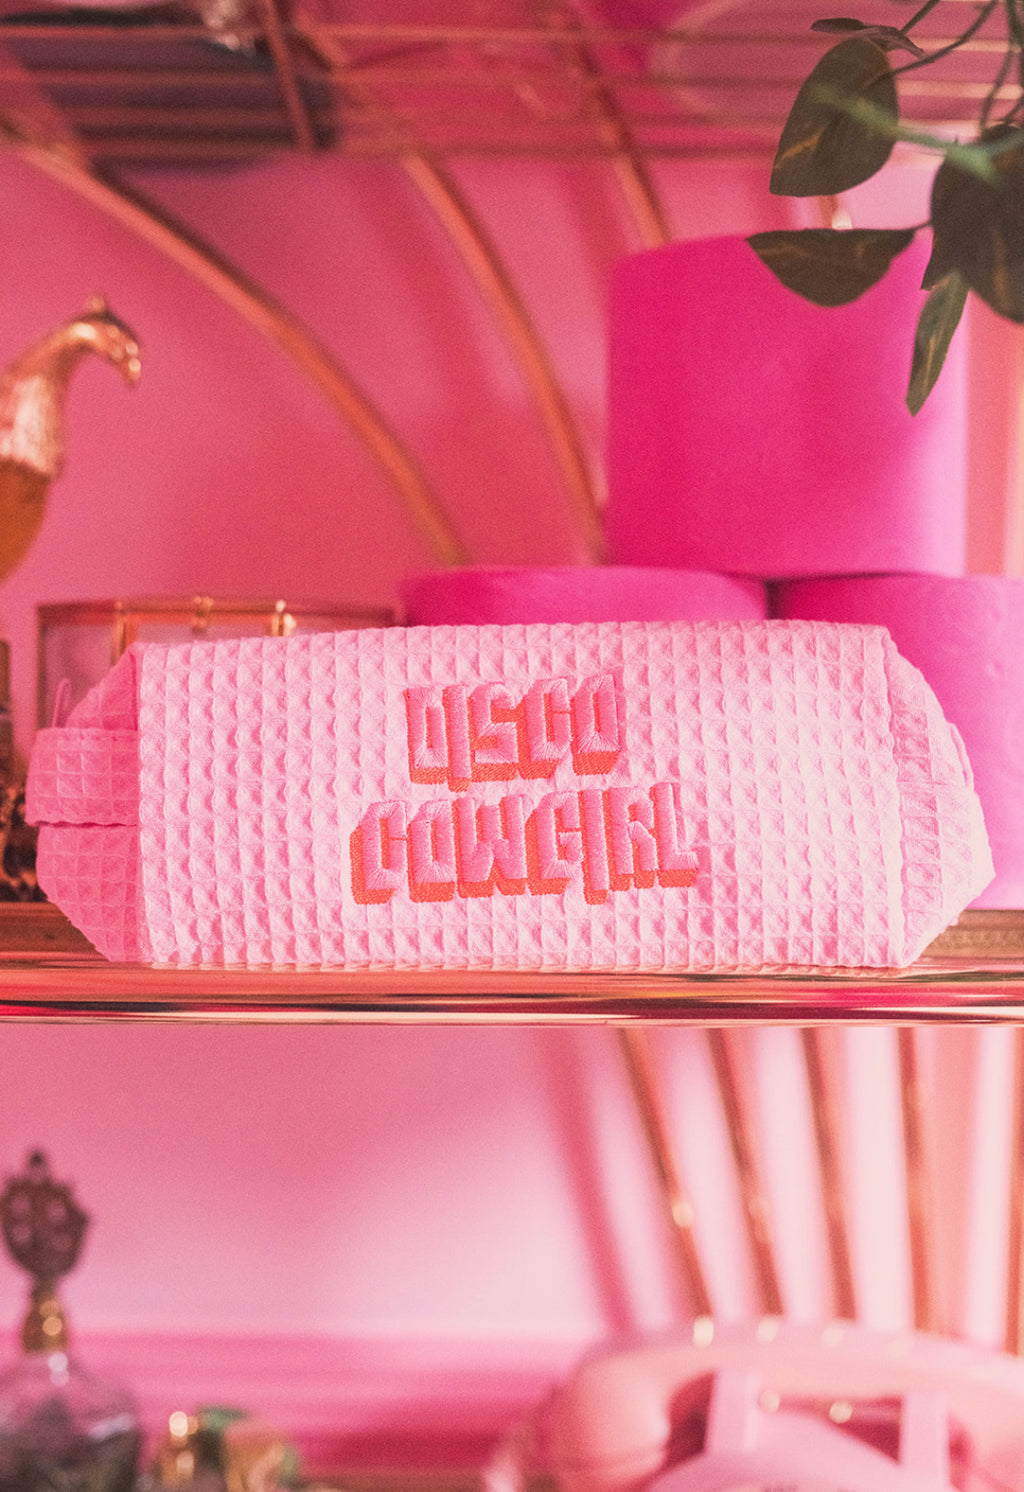 Pink Small Cosmetic Bag